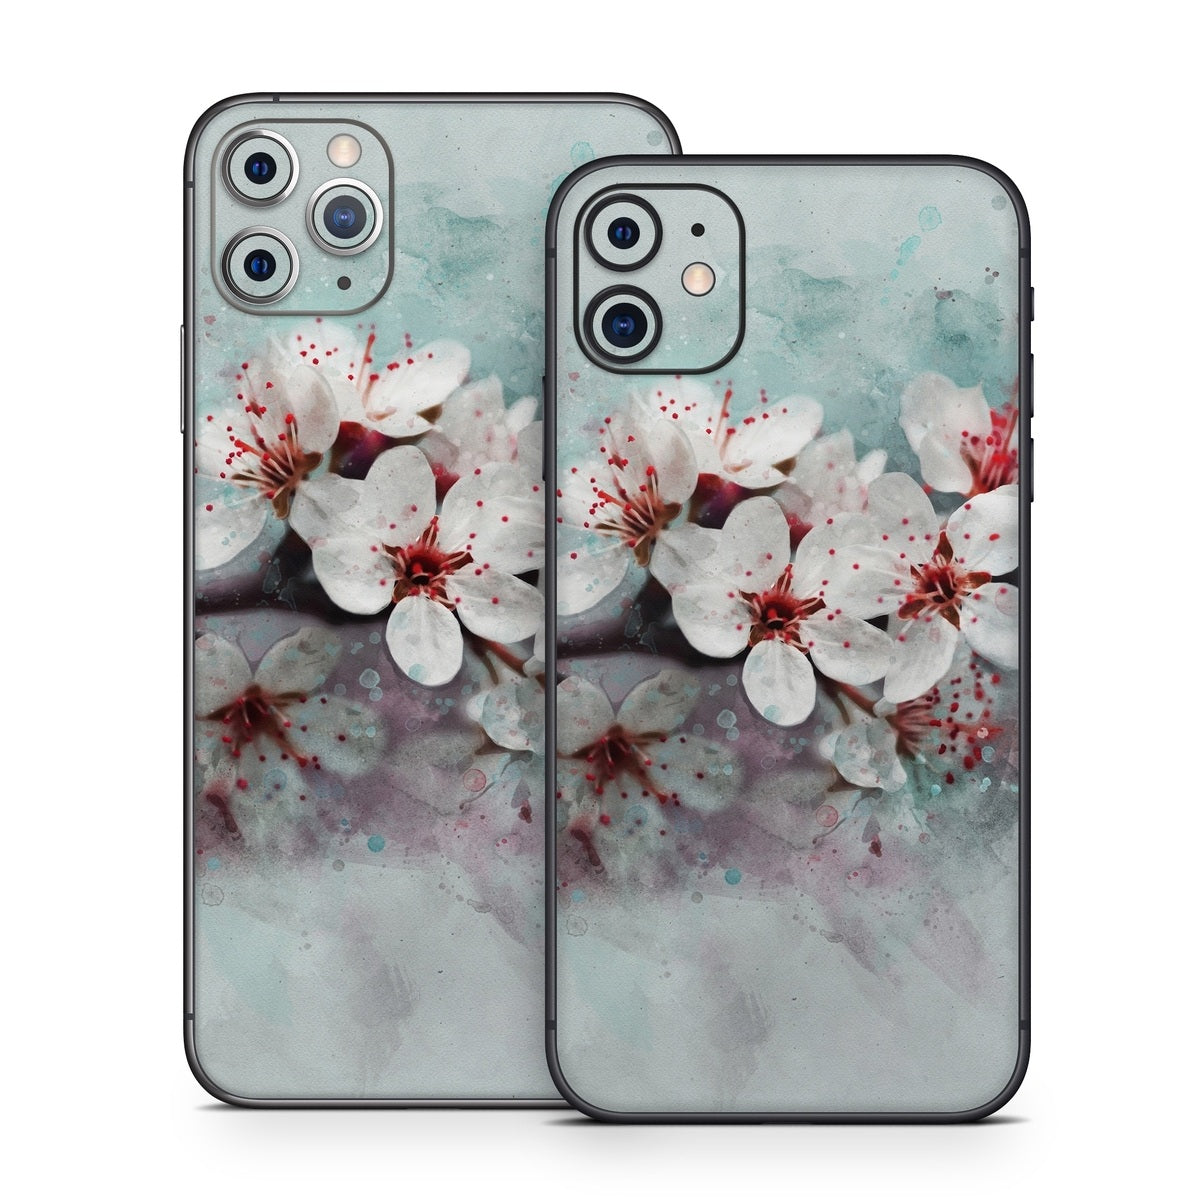 Cherry Blossoms - Apple iPhone 11 Skin